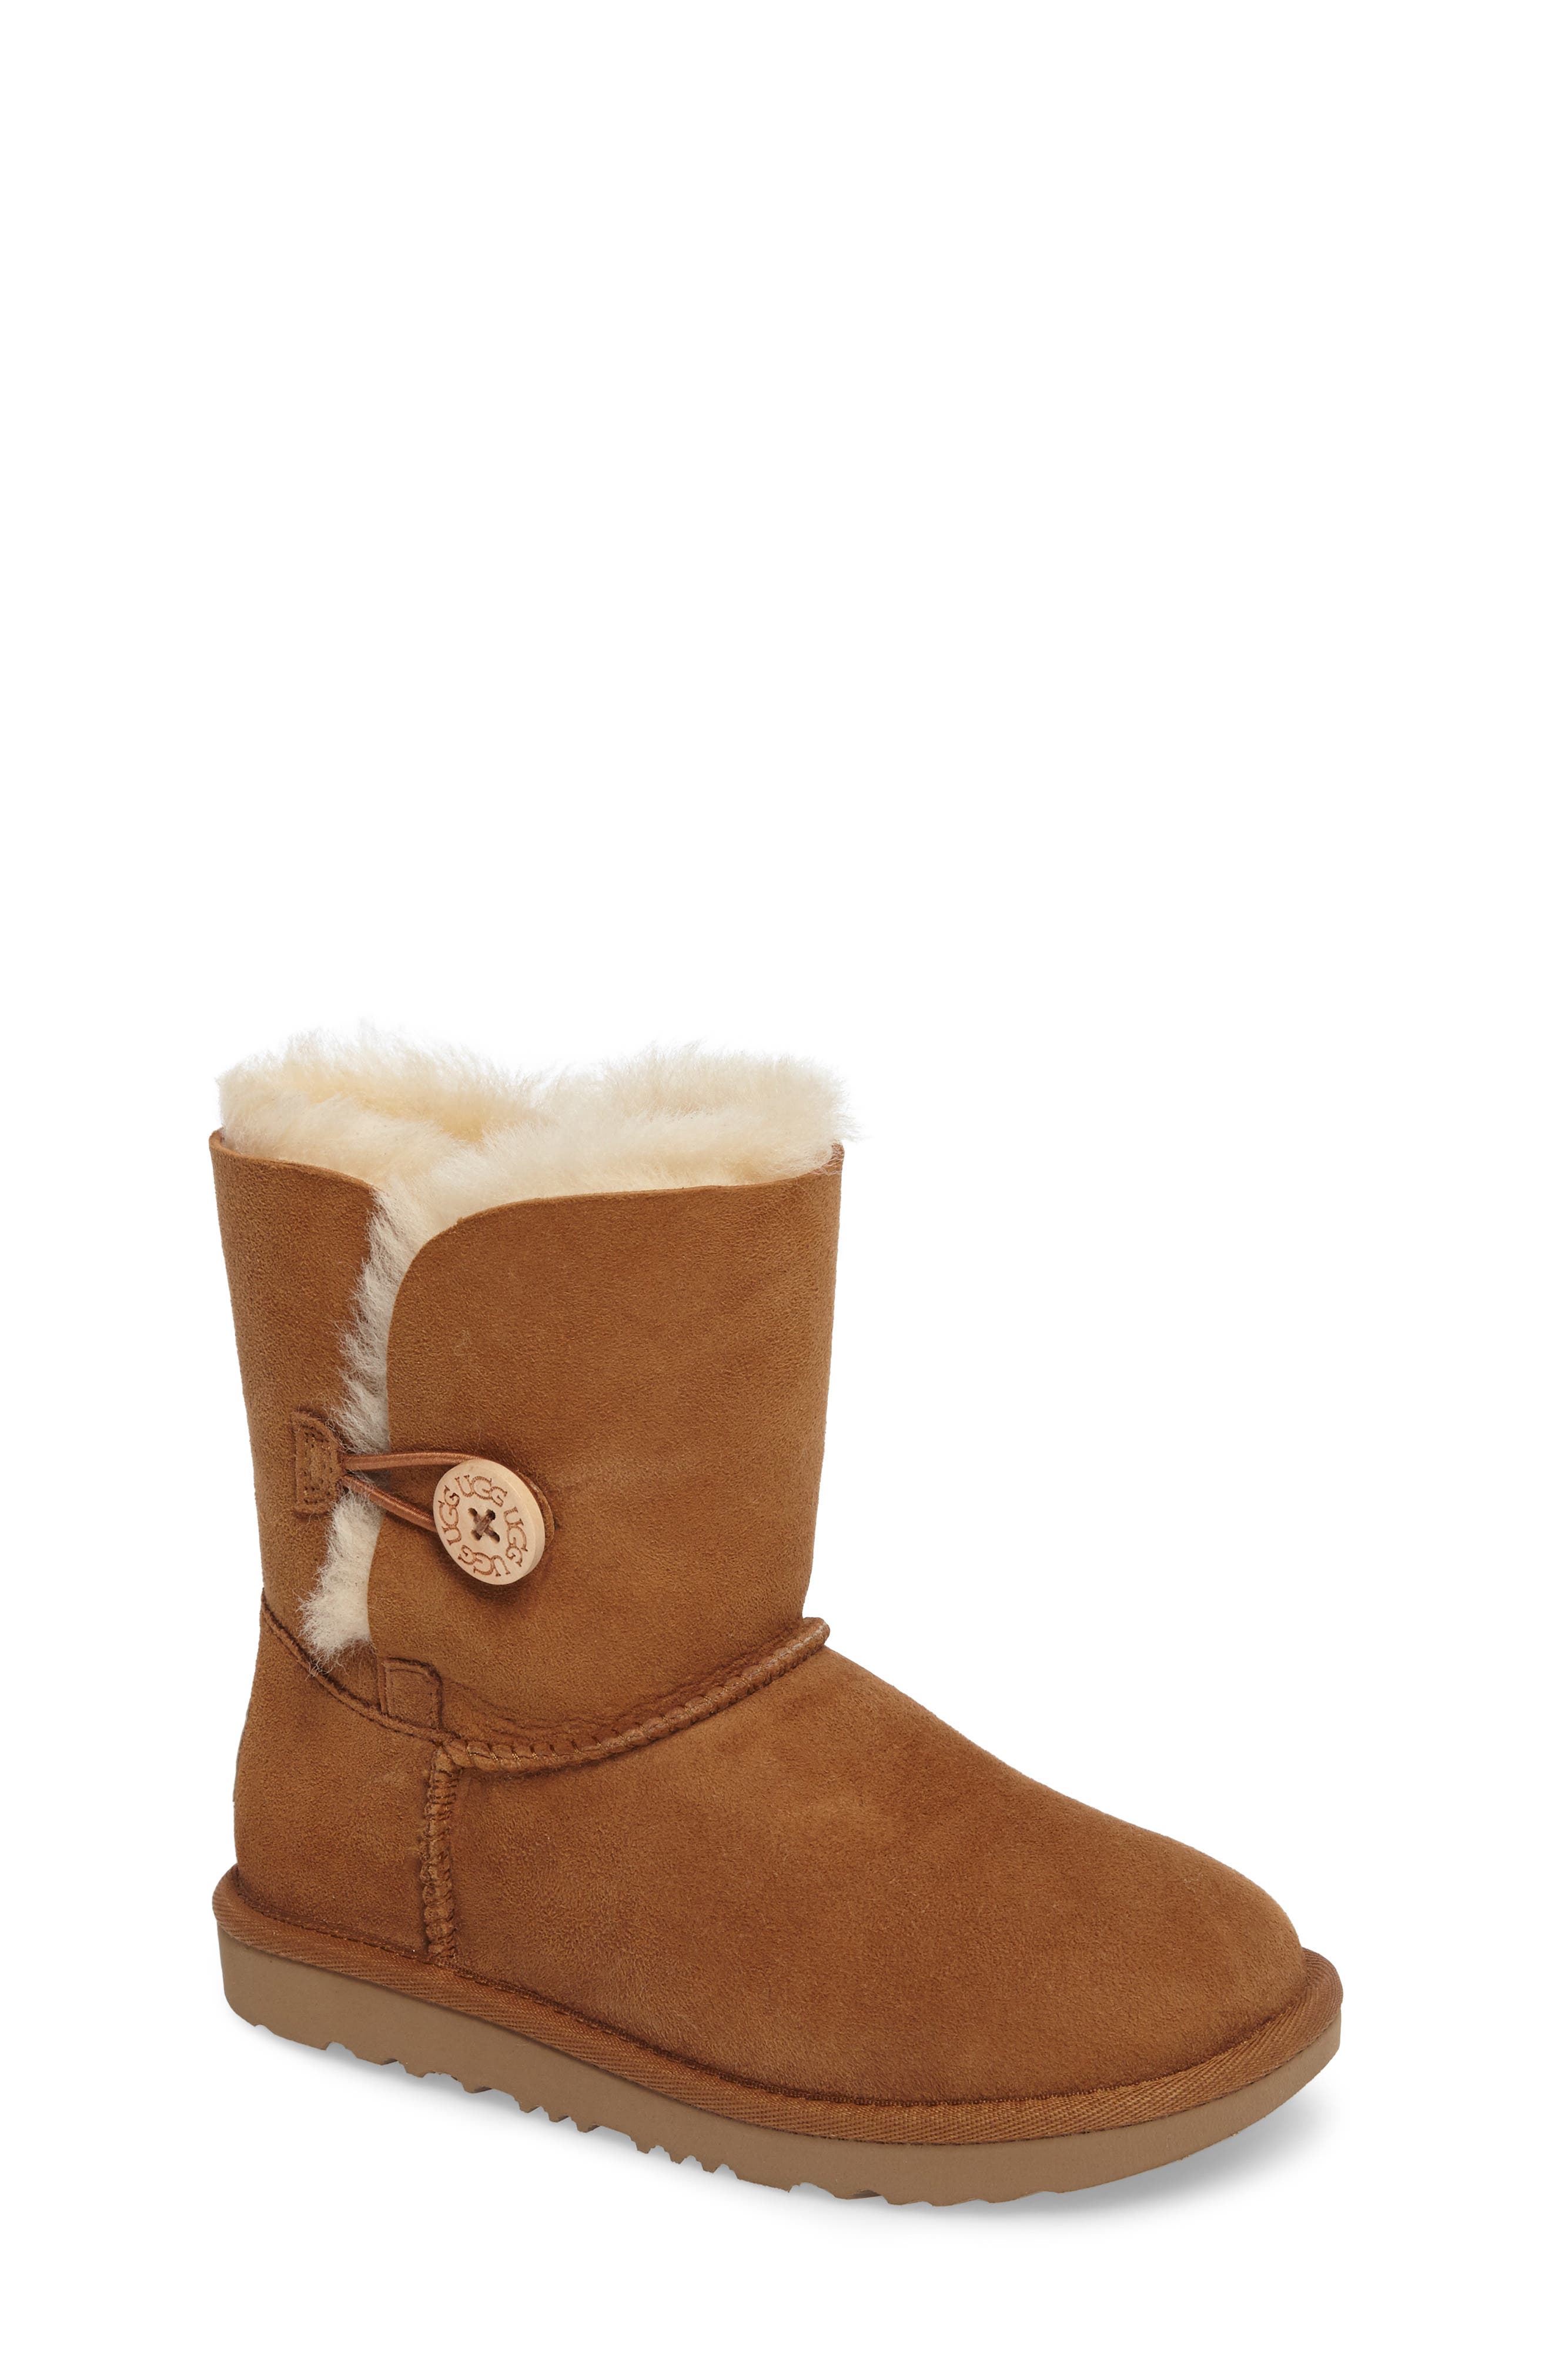 w bailey button puff uggs